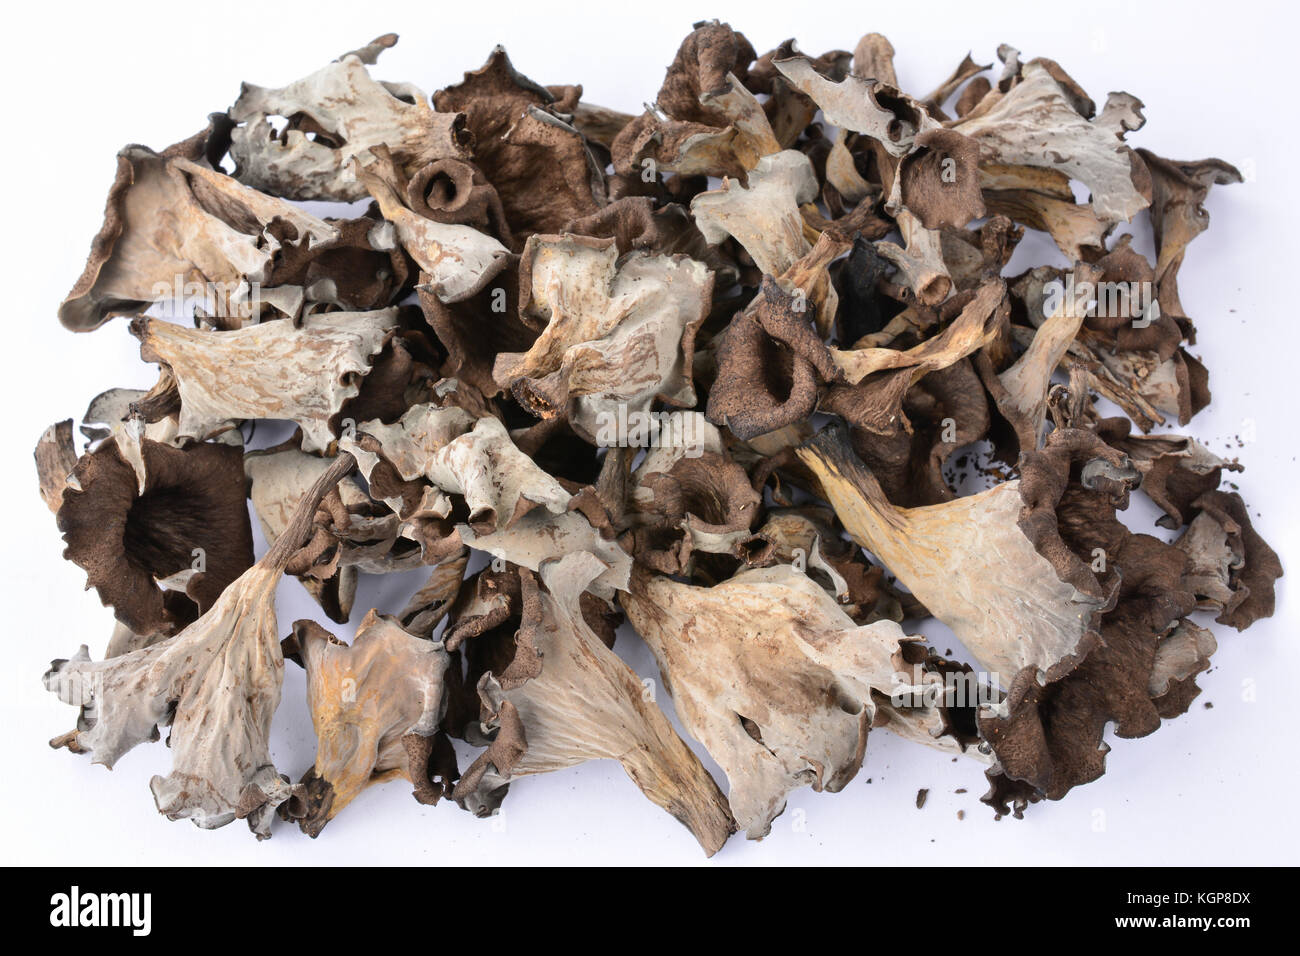 Big pile of dried delicious and spicy Horn of Plenty mushrooms over white background Stock Photo